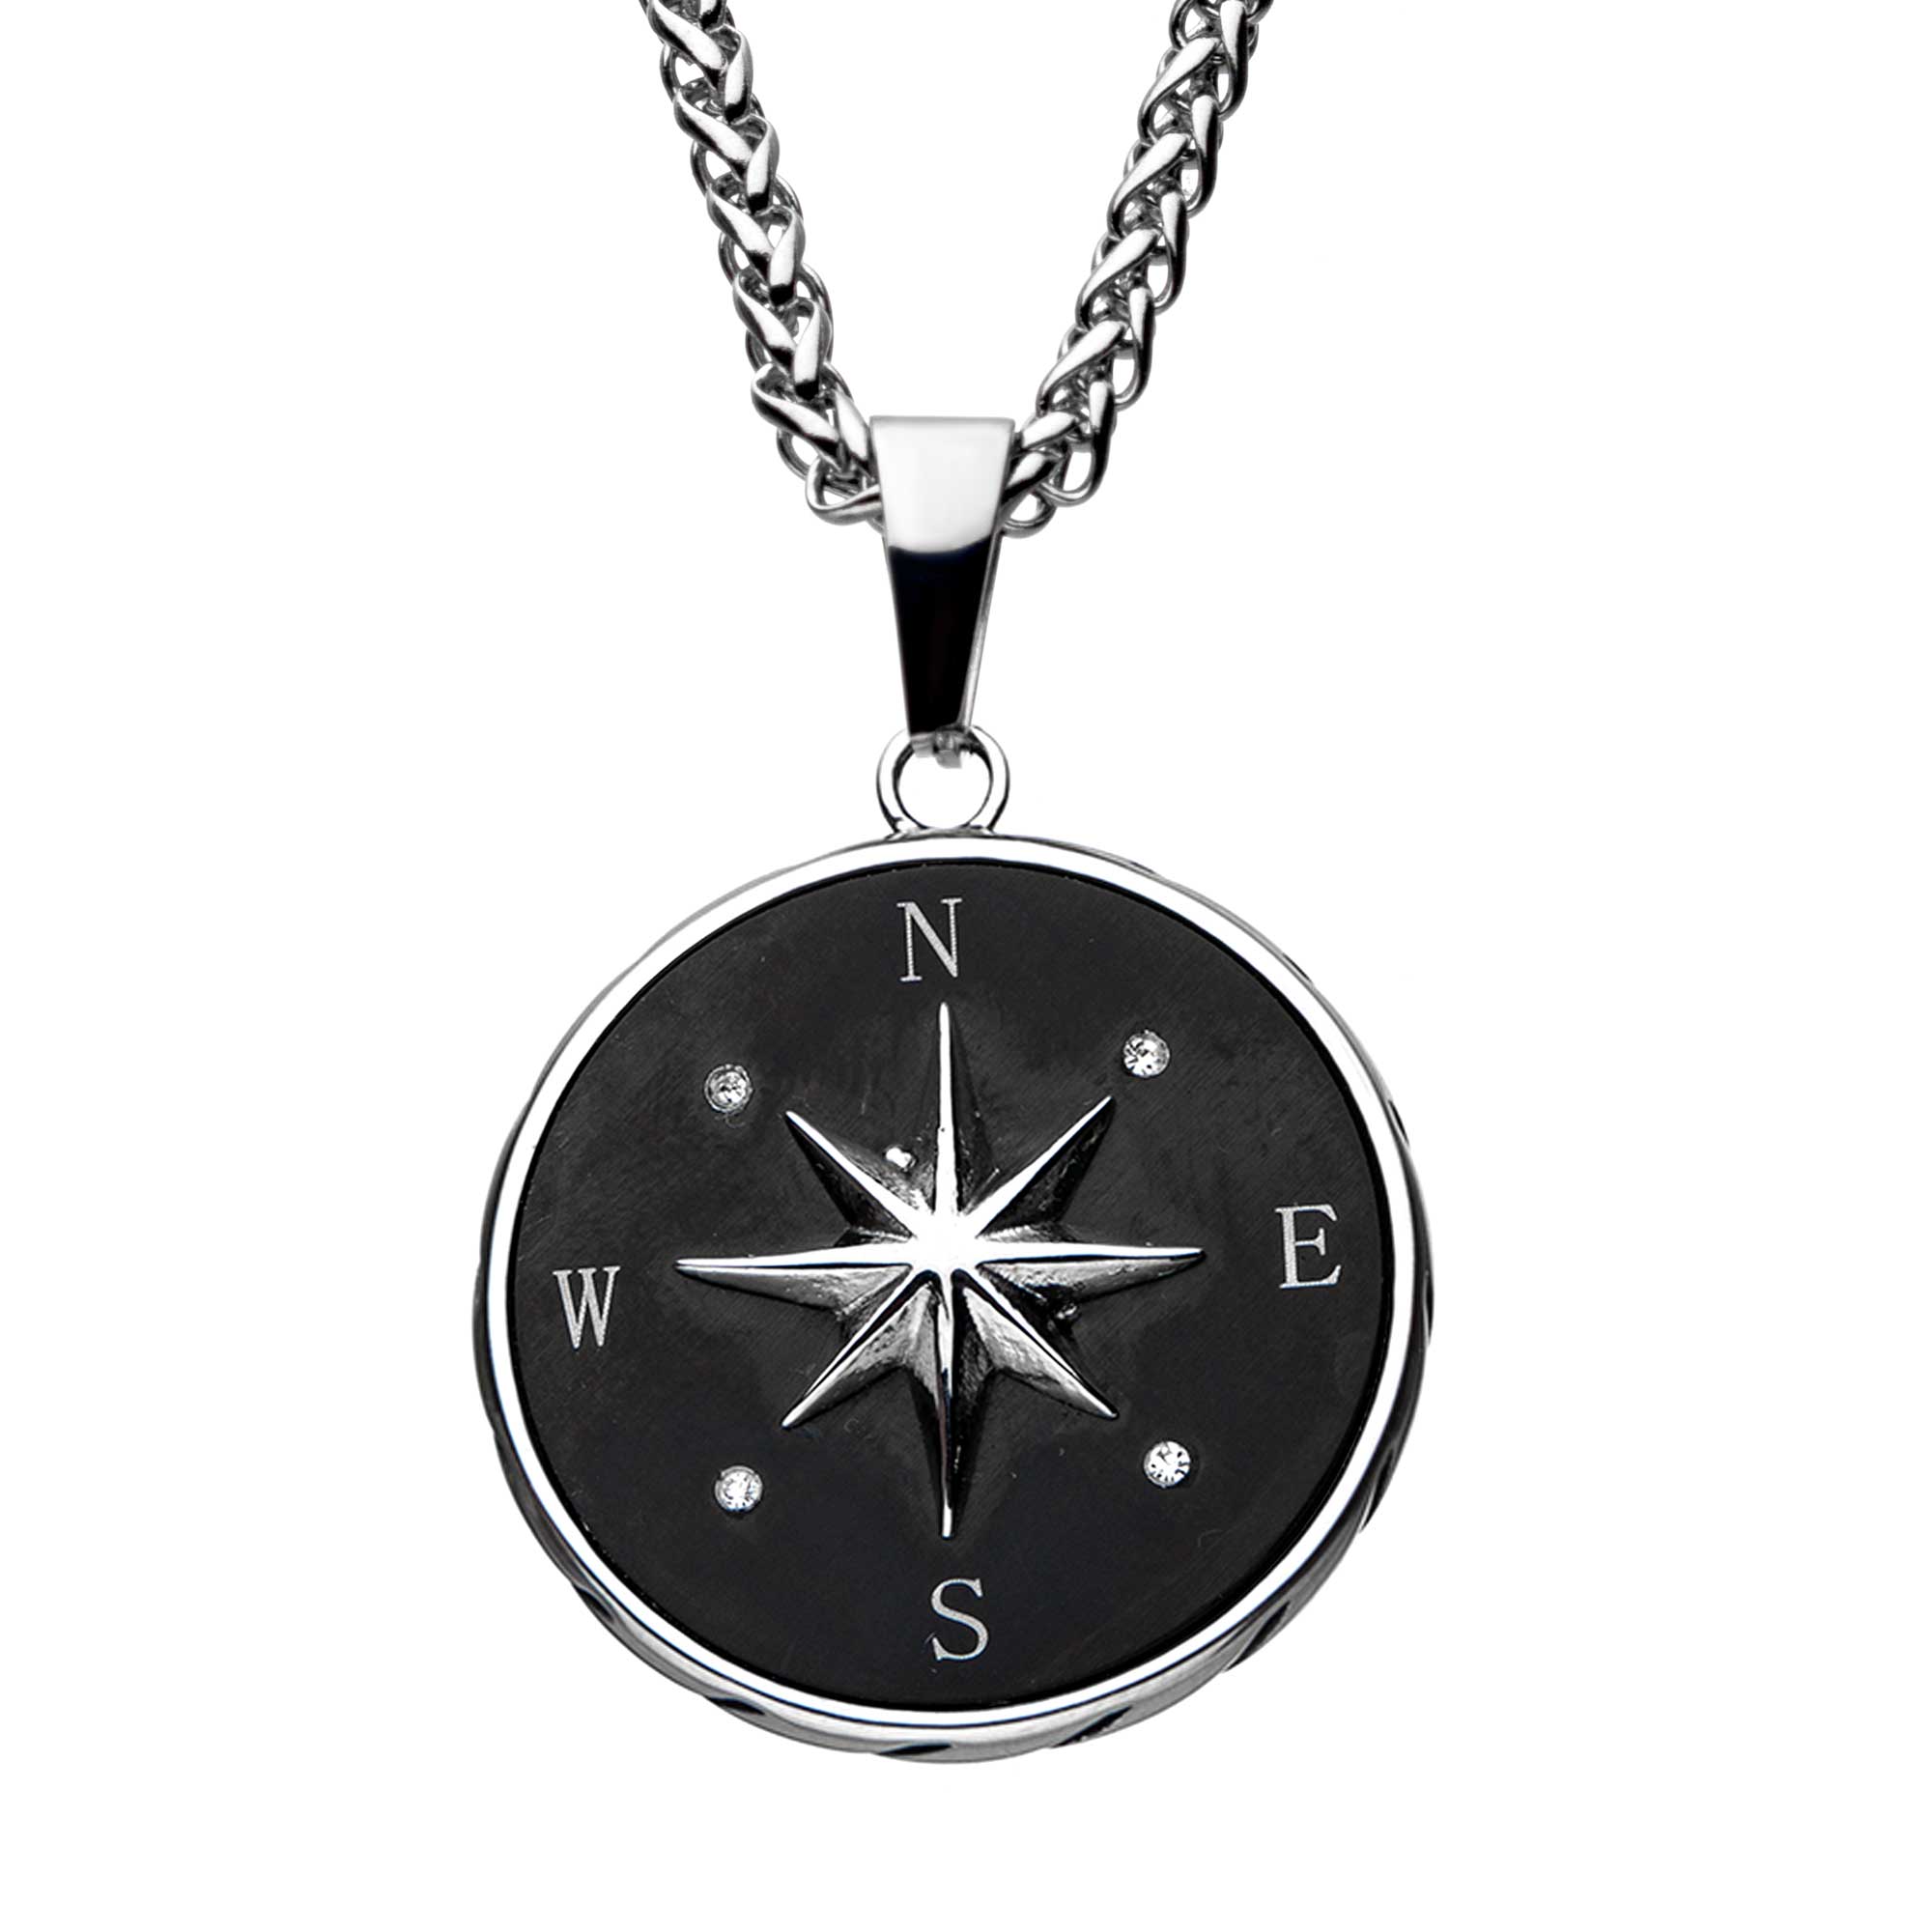 Stainless Steel and Black Plated Compass Pendant with Chain Midtown Diamonds Reno, NV